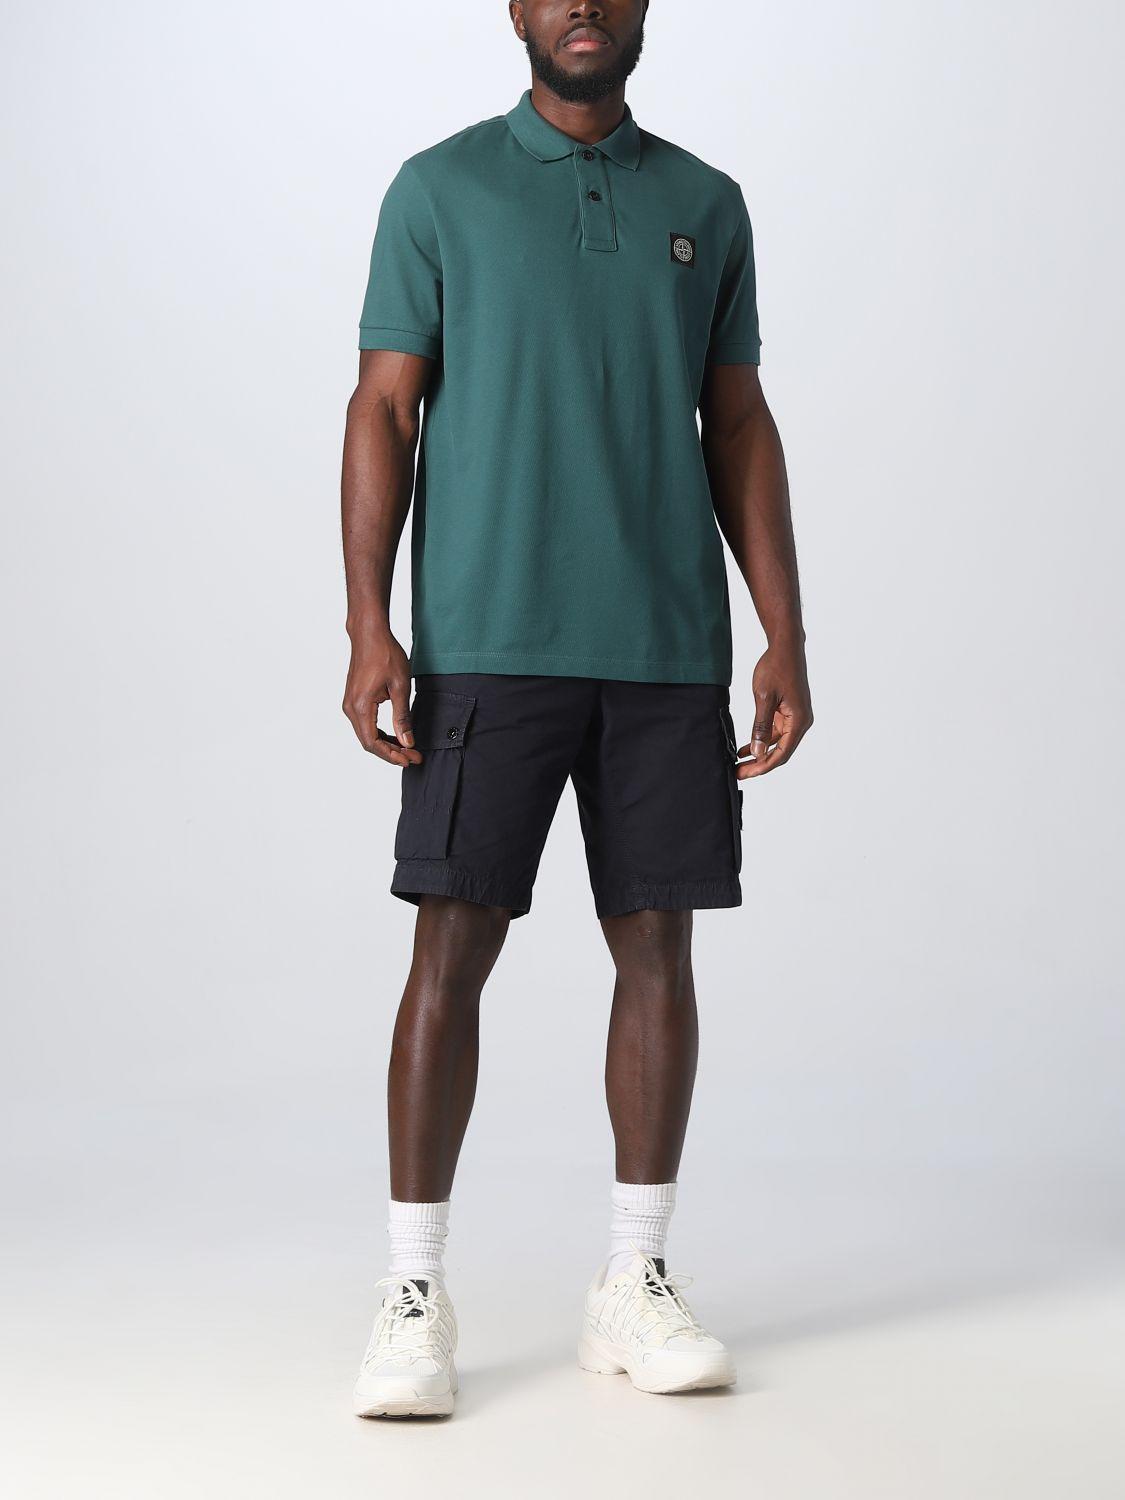 Stone Island Polo Shirt in Green for Men | Lyst